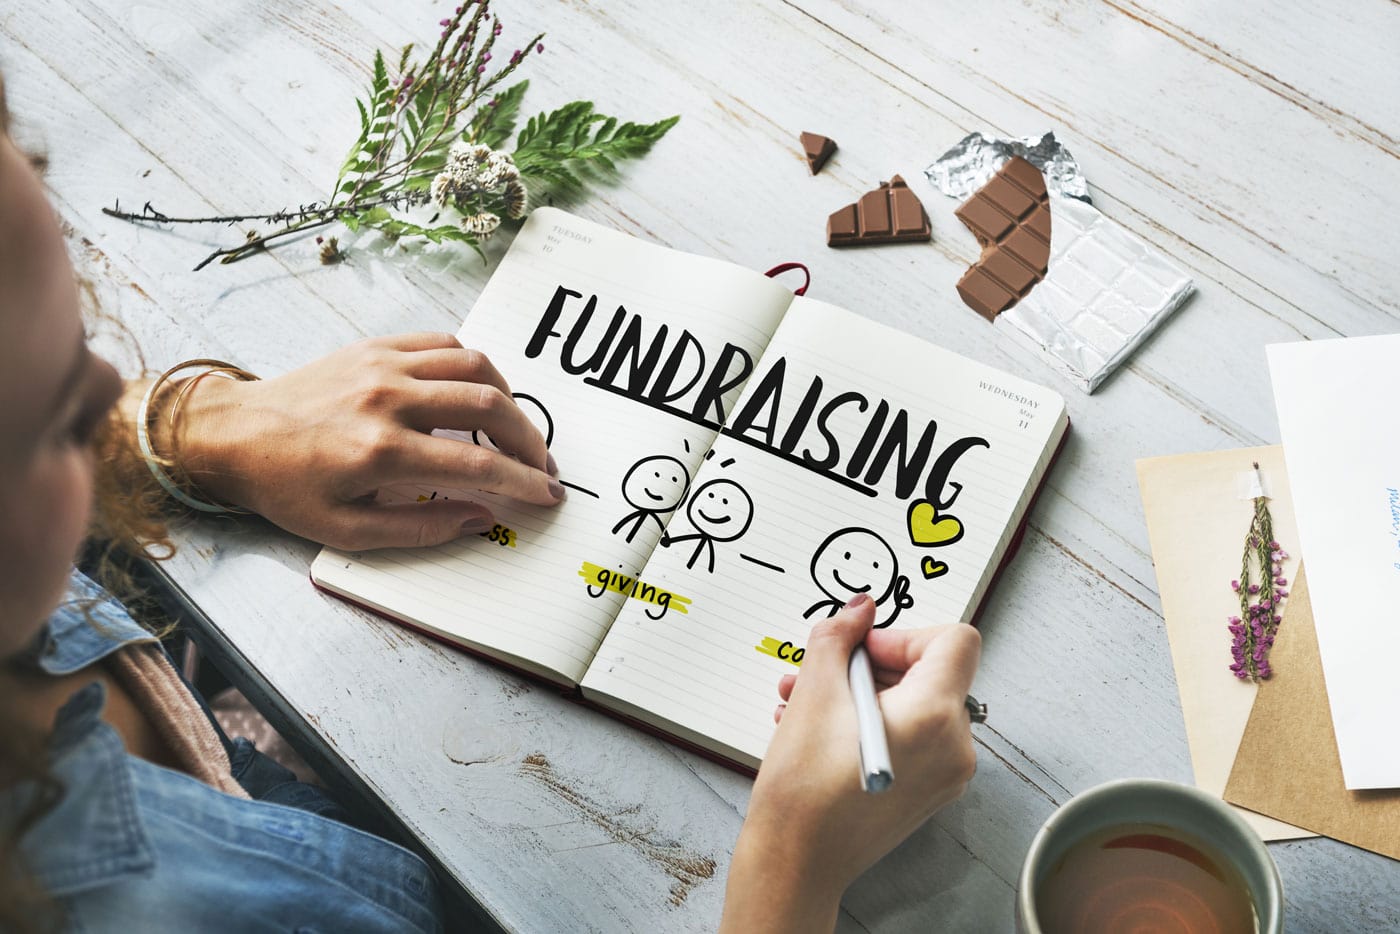 An image of an open notebook on a wooden table, with hands drawing an image of two stick people under the word fundraising, illustrating how a strategic plan can be used to boost fundraising.